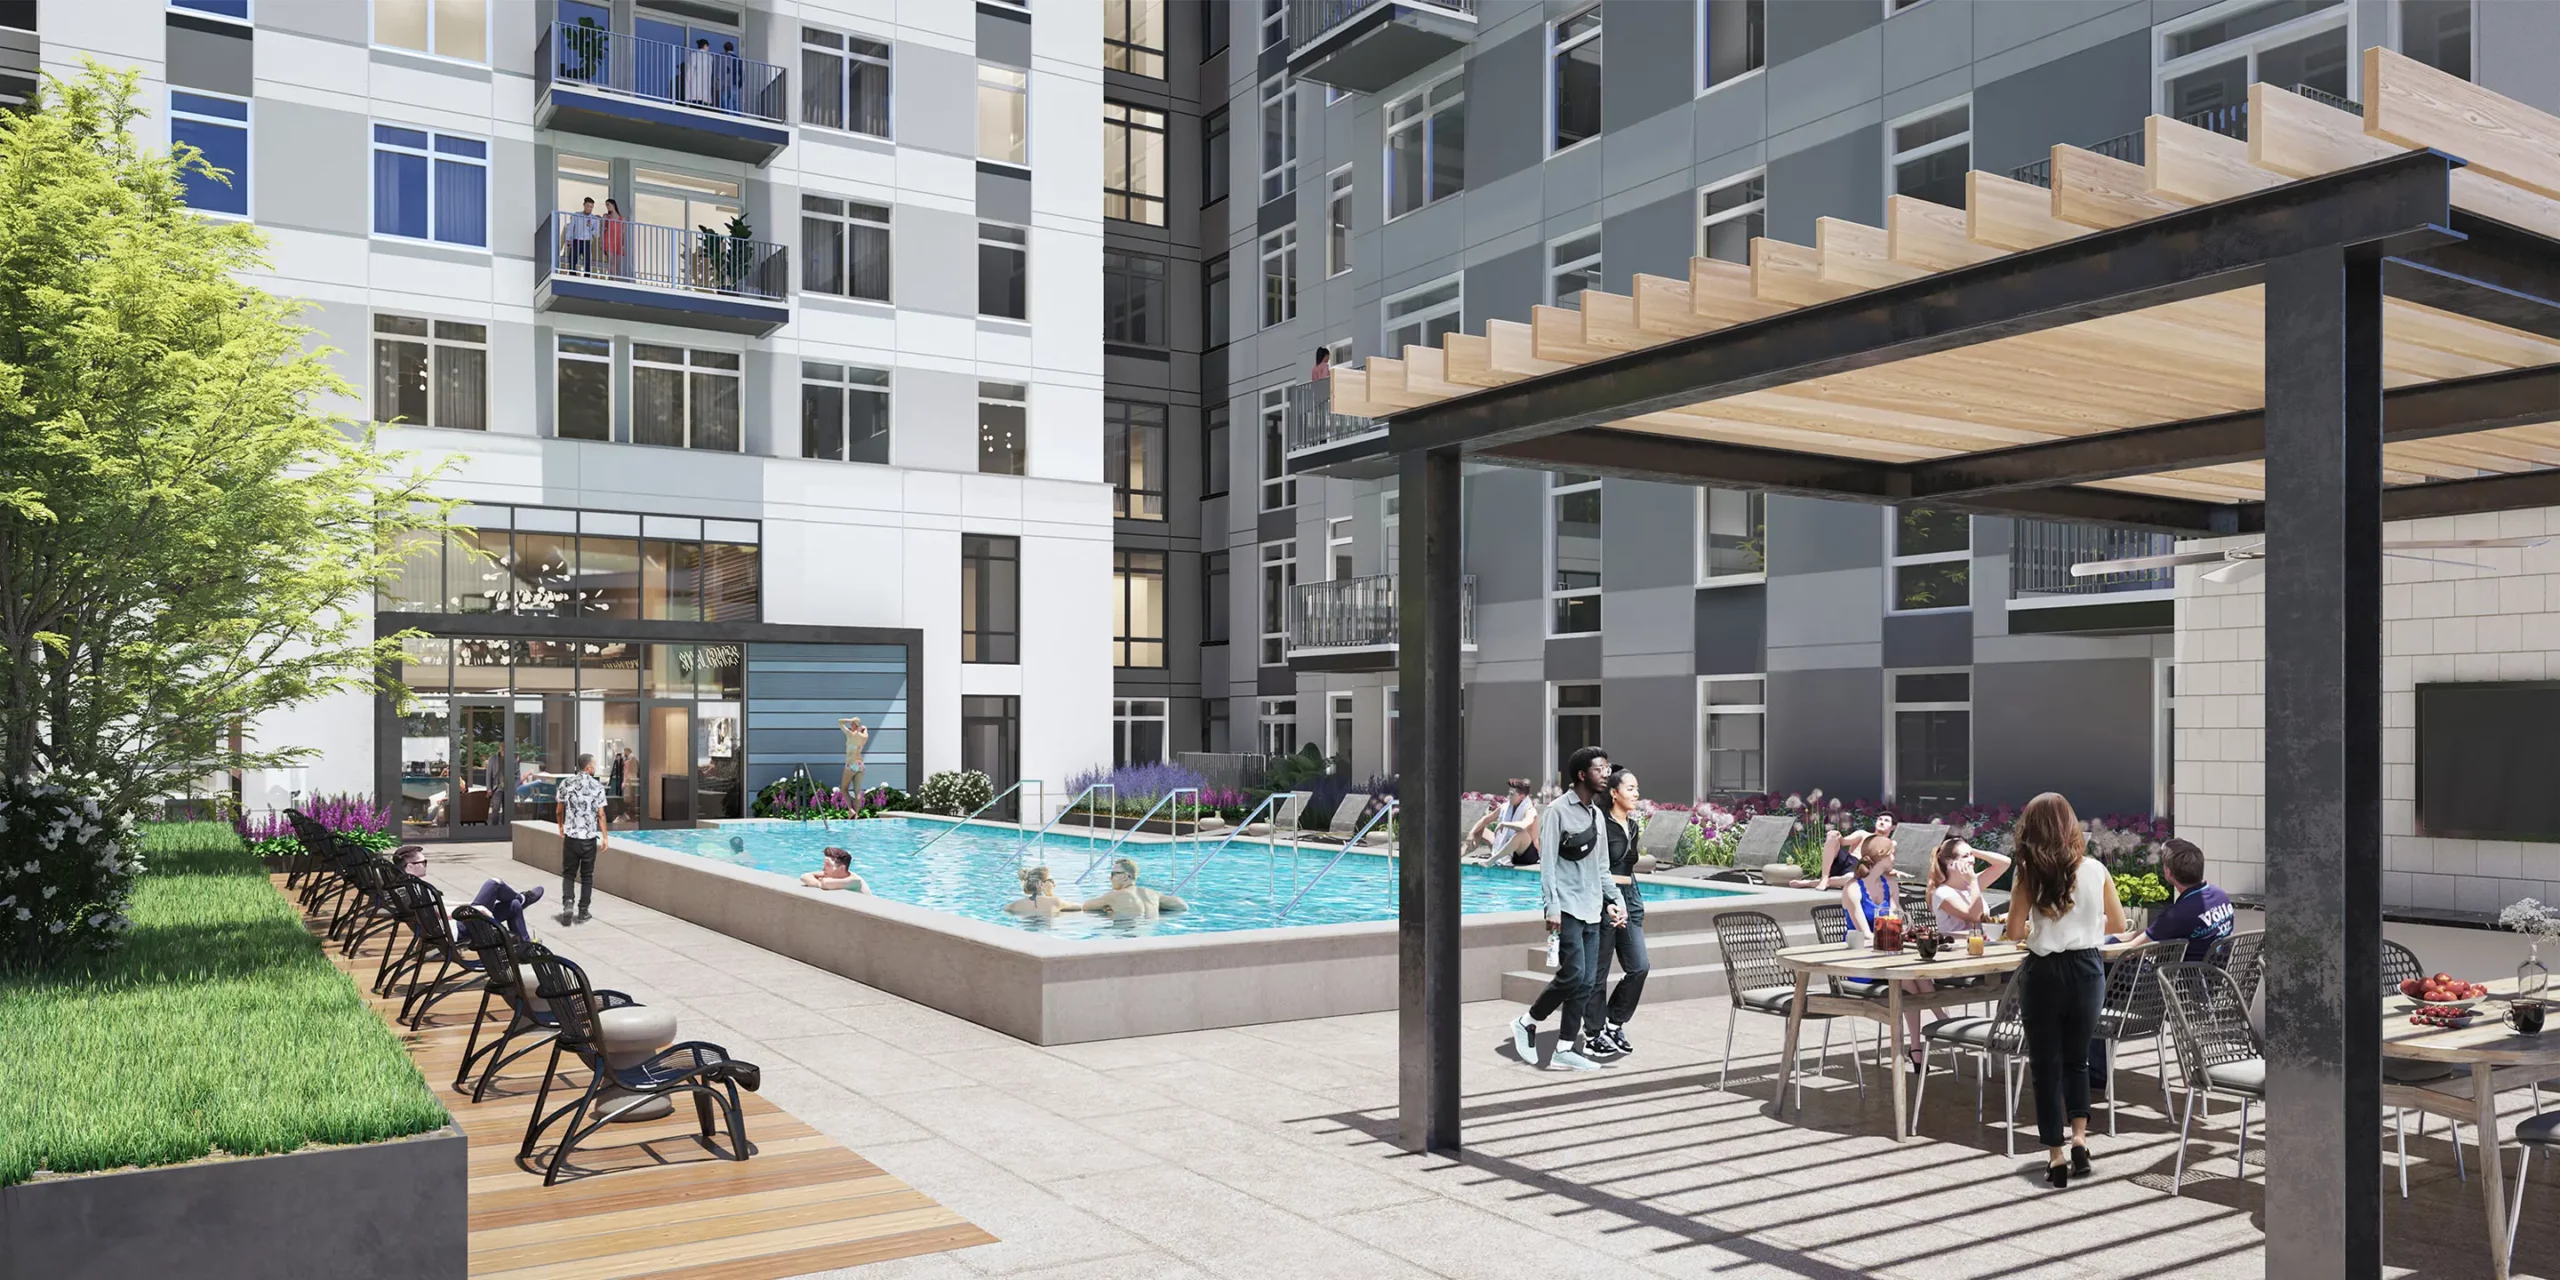 modera-gulch-cooper-carry-multifamily-residential-rendering-pool-amenity